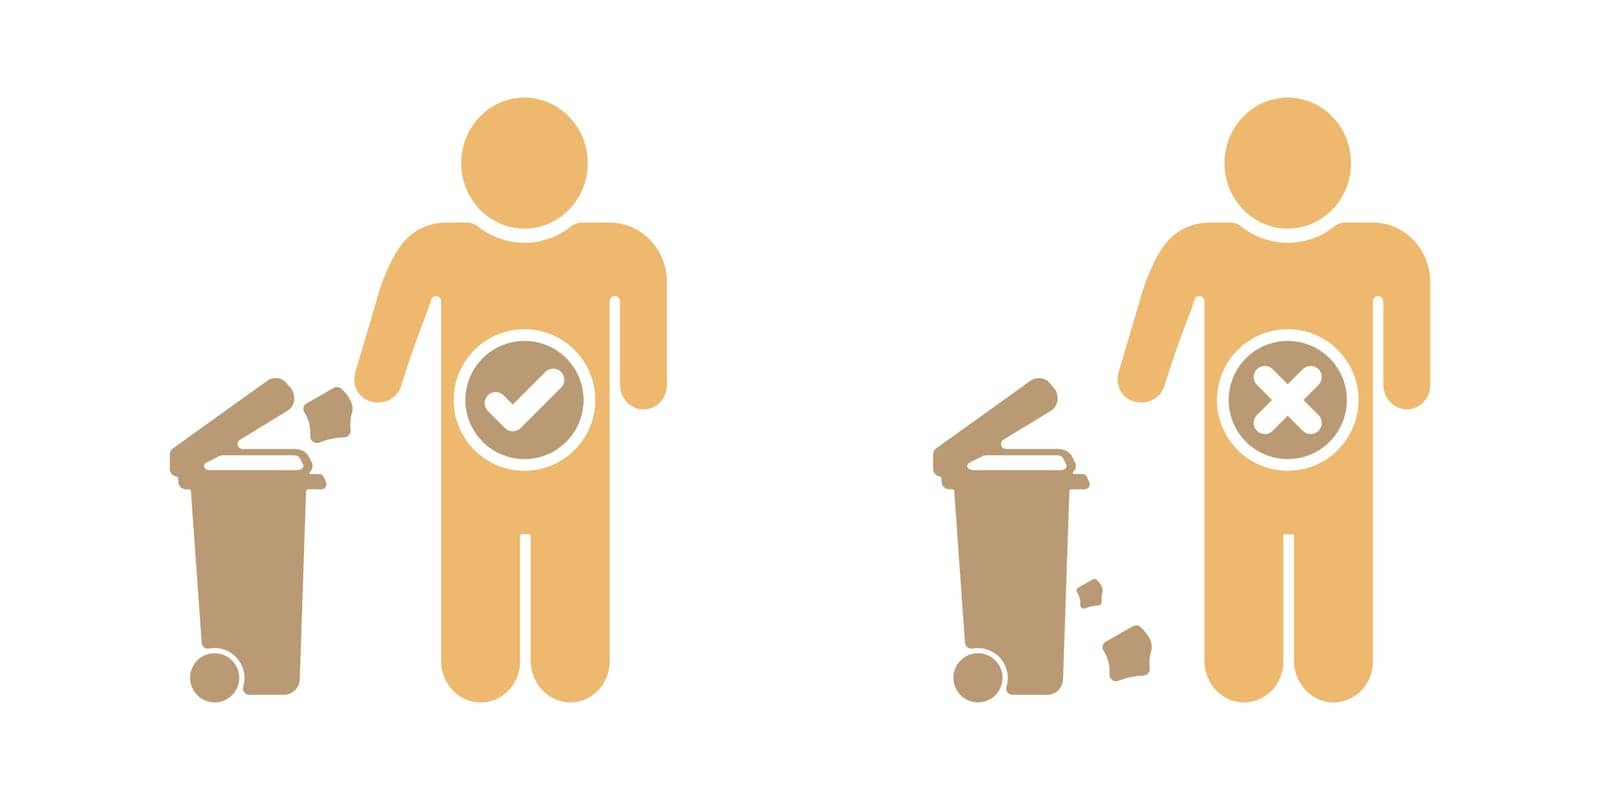 Man throwing garbage vector icon. No environmental pollution. Do not litter vector icon. How to properly dispose of garbage. Cleanliness starts with you. by Moreidea